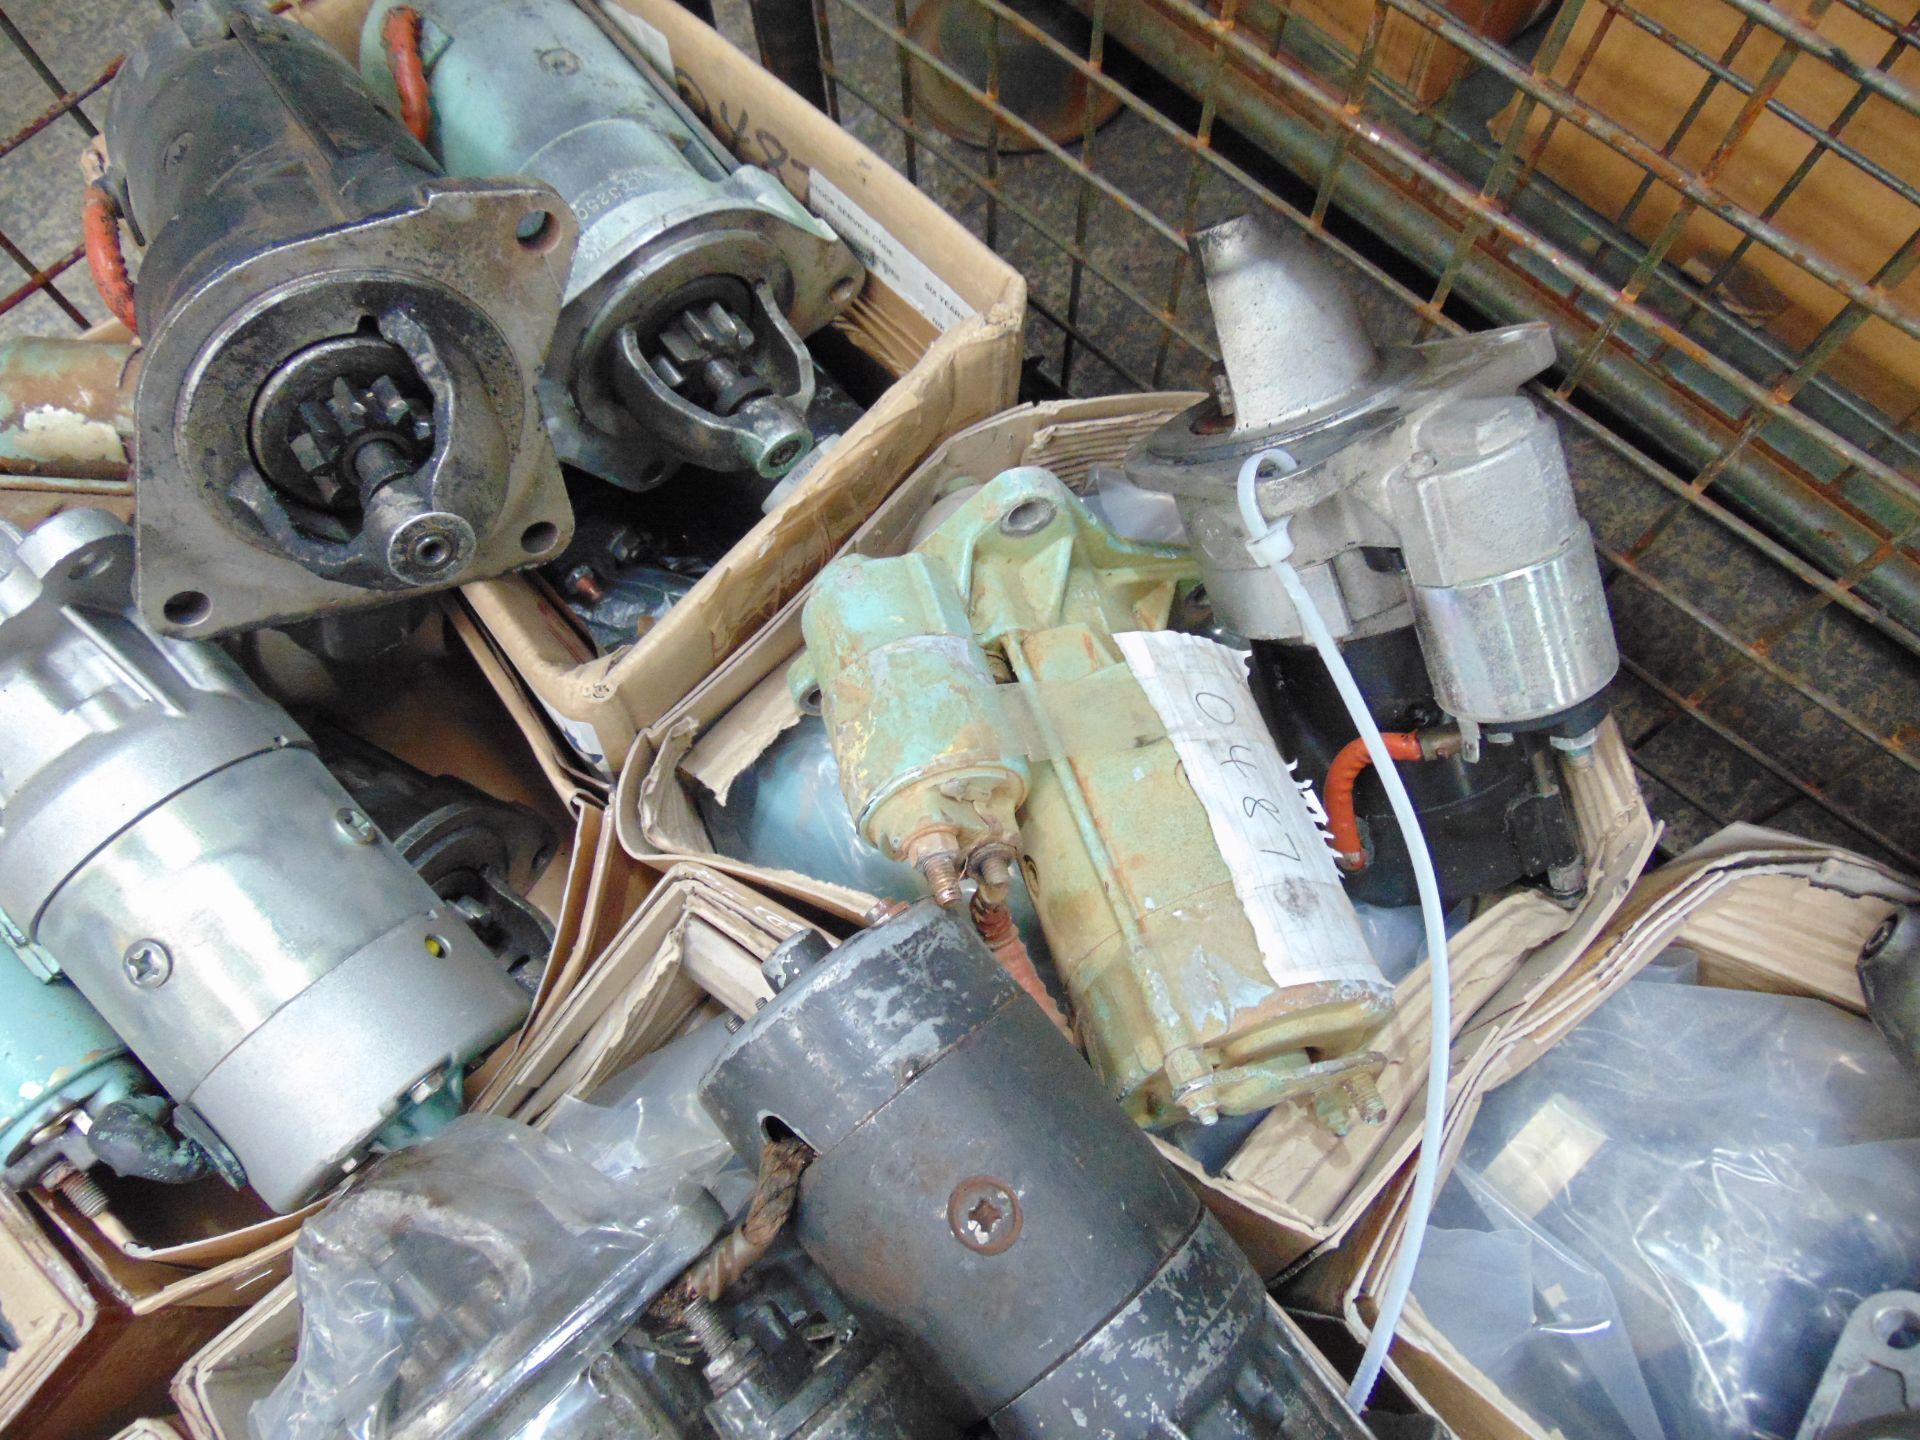 45 x Takeout Land Rover Starter Motors - Image 4 of 7